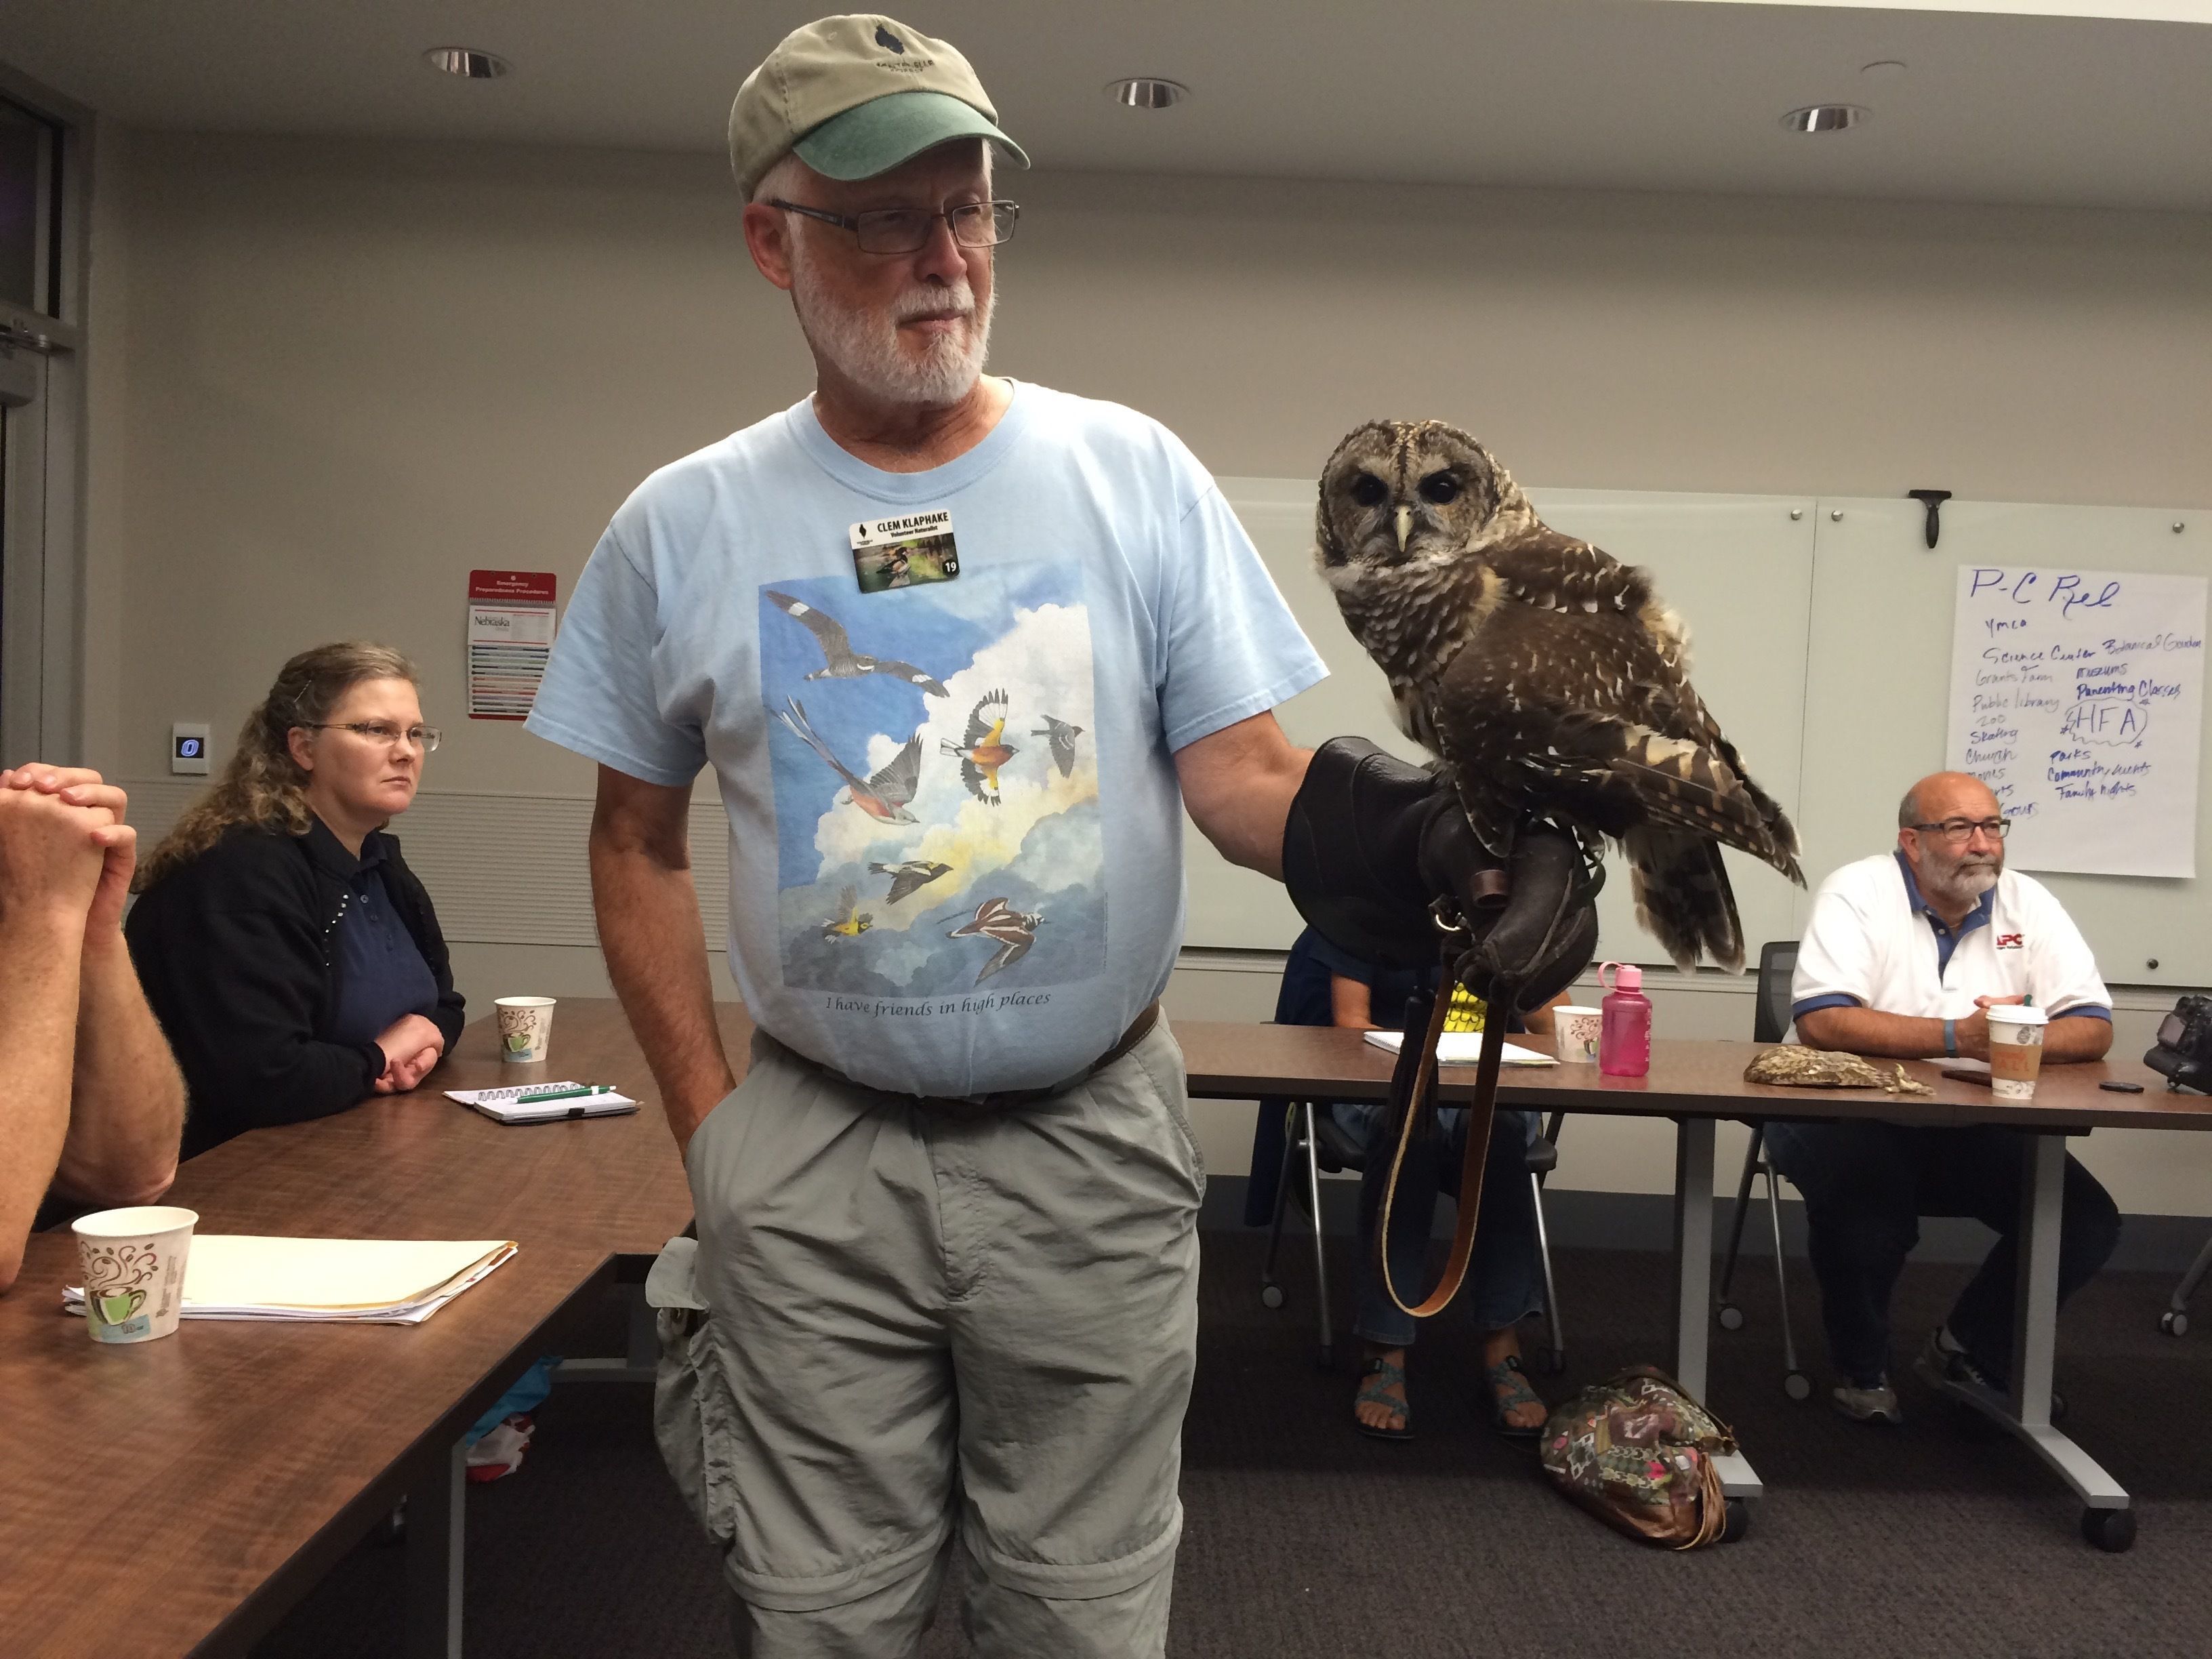 Image of a Barred Owl perched on the hand of Clem Klaphake within a classroom education setting.